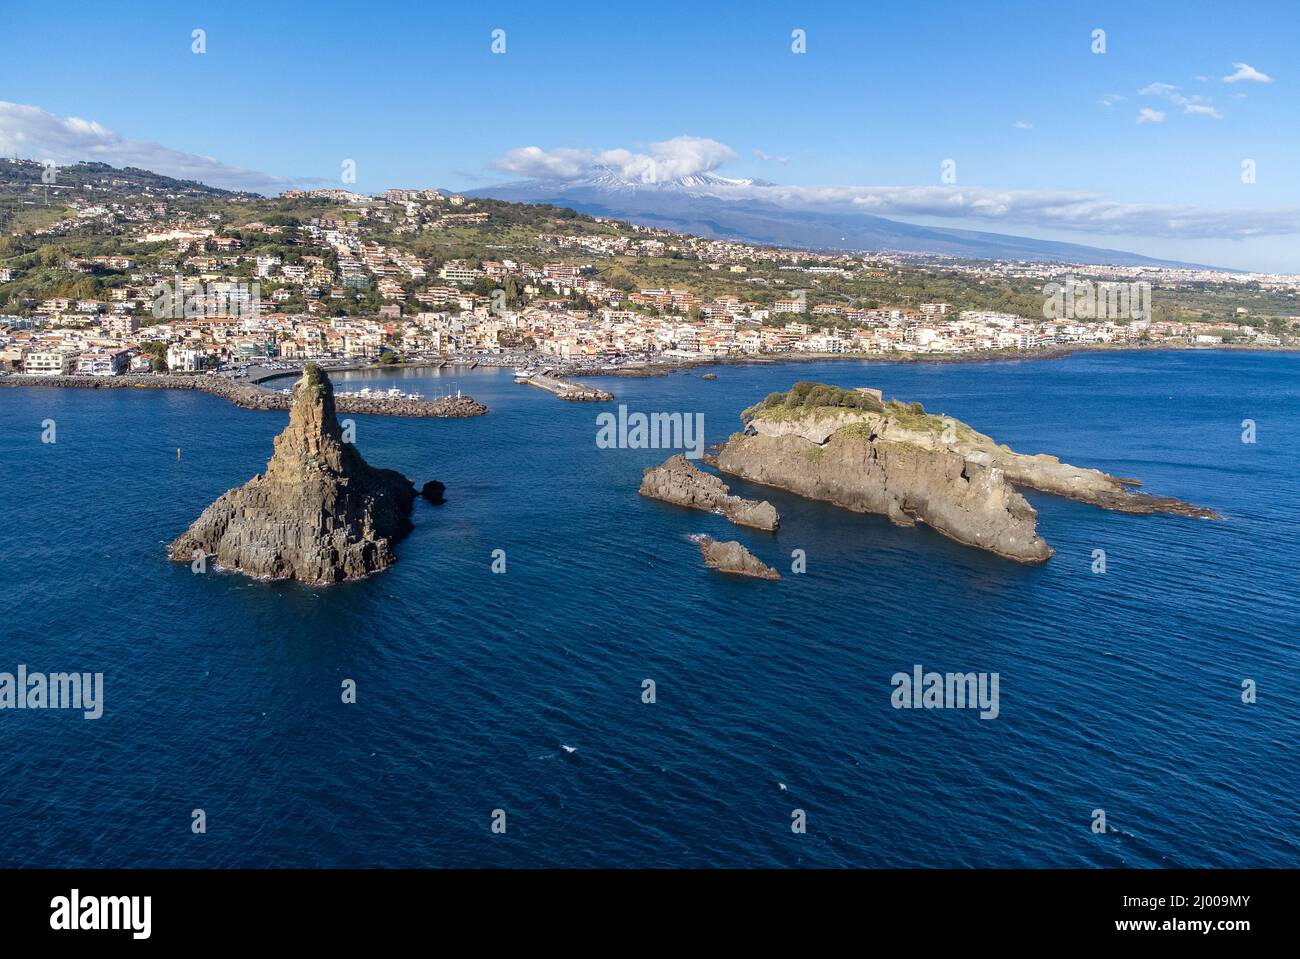 Aerial View. Panoramic drone image of the stacks of Acitrezza with mount Etna in the background - Travel destination, Catania, Sicily, Italy Stock Photo